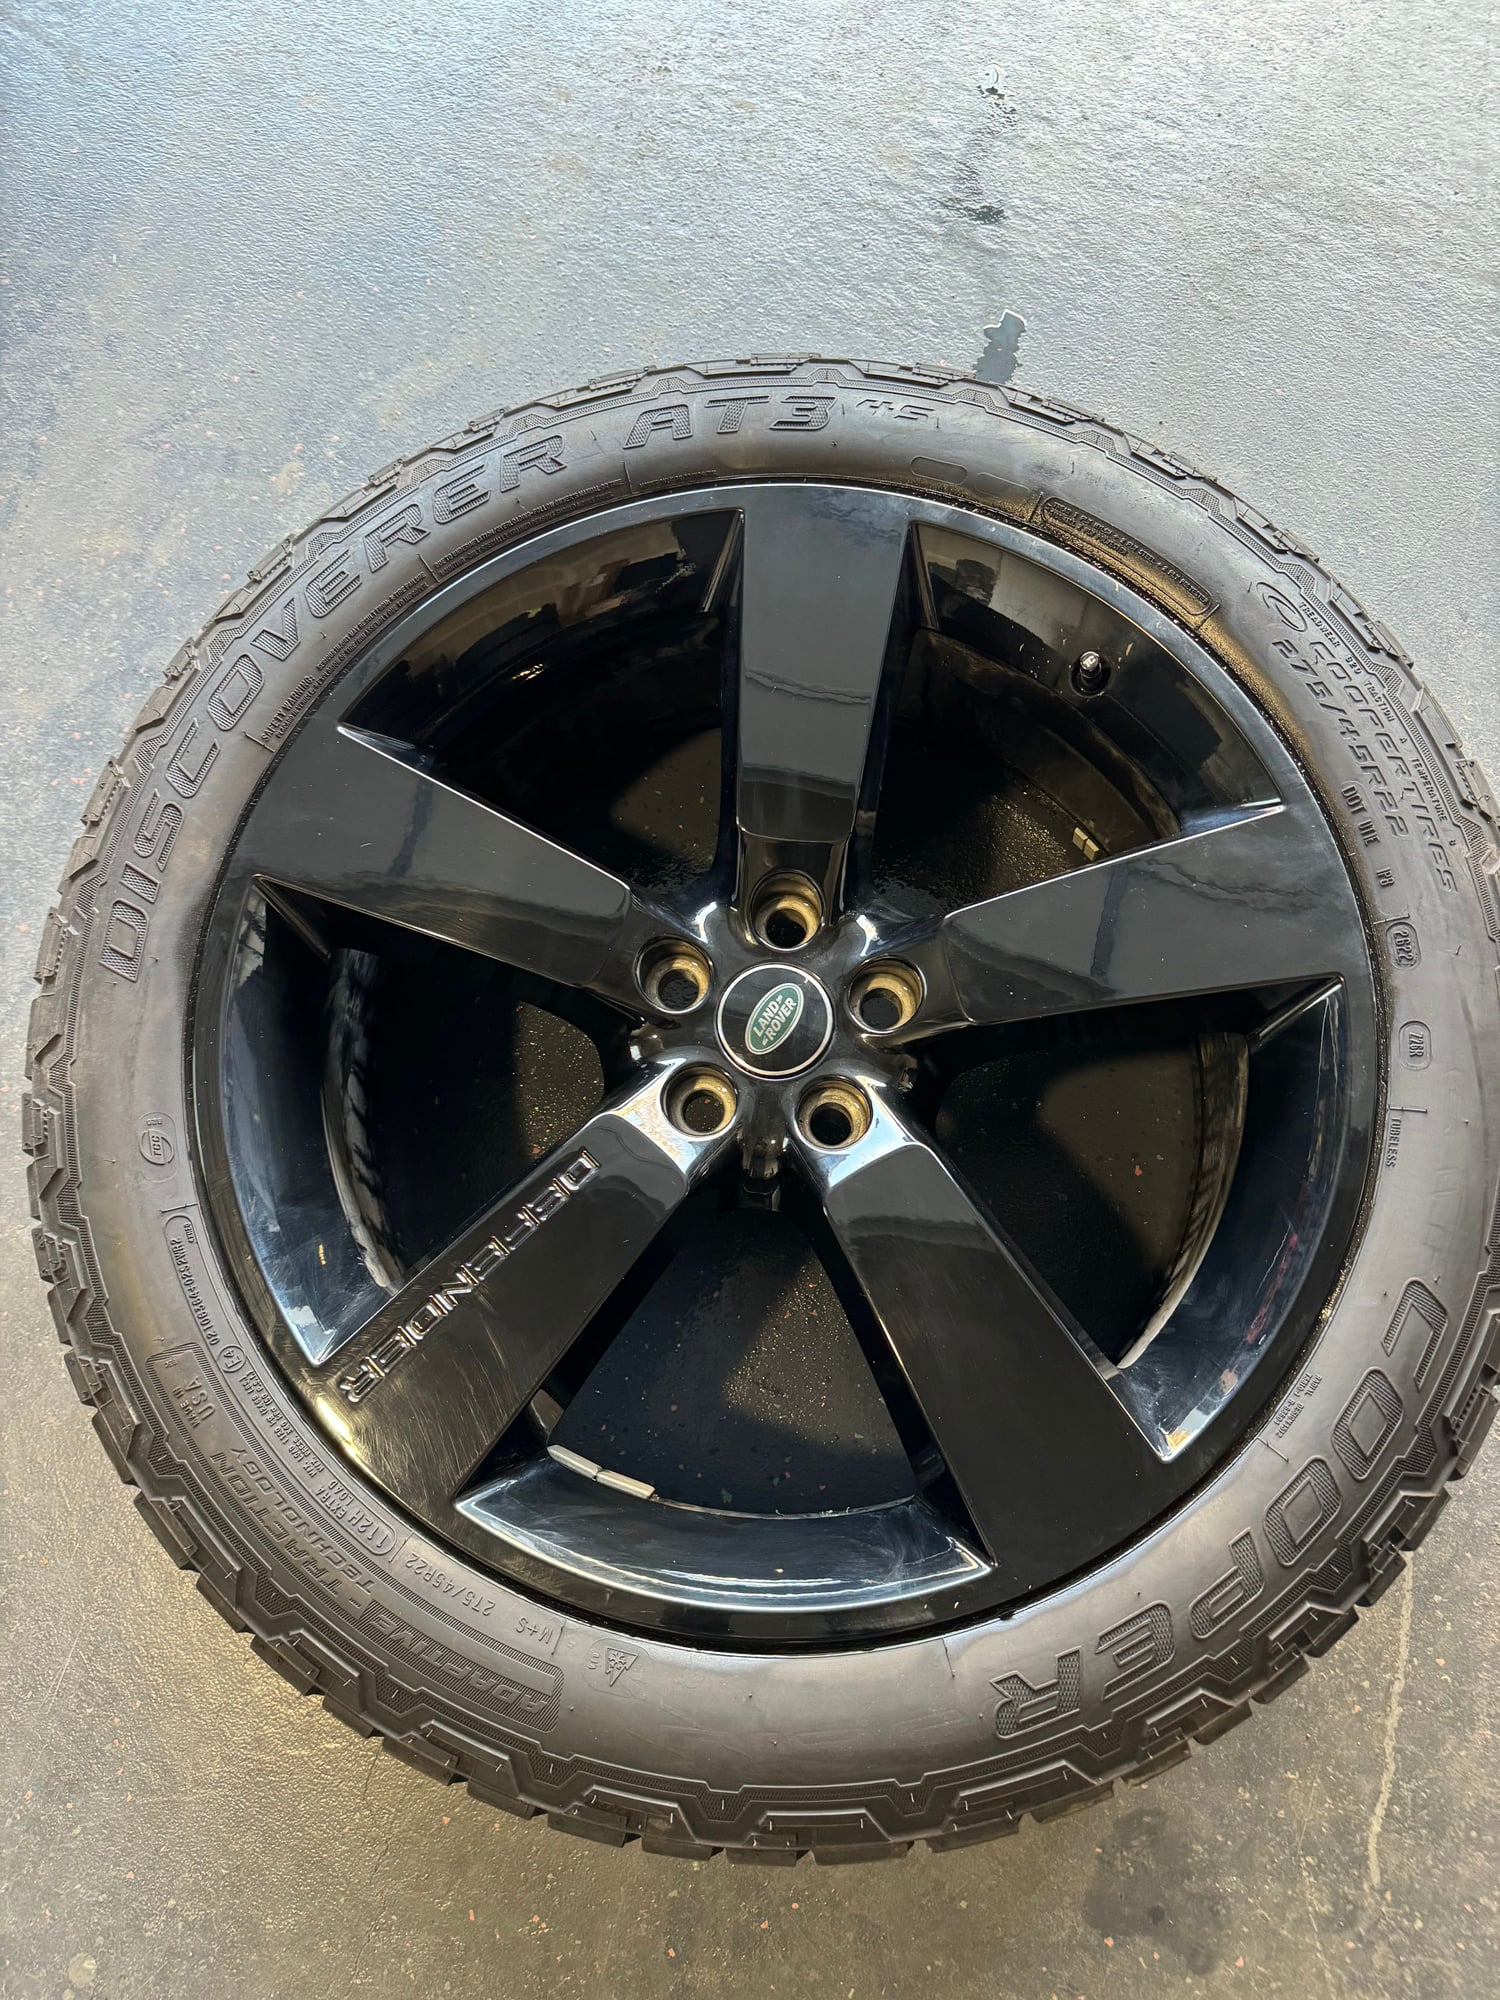 Wheels and Tires/Axles - Land Rover Defender 22" Style 5098 Gloss Black, Cooper AT3 4S Tire,  Includes Spare - Used - All Years  All Models - Denver, CO 80204, United States